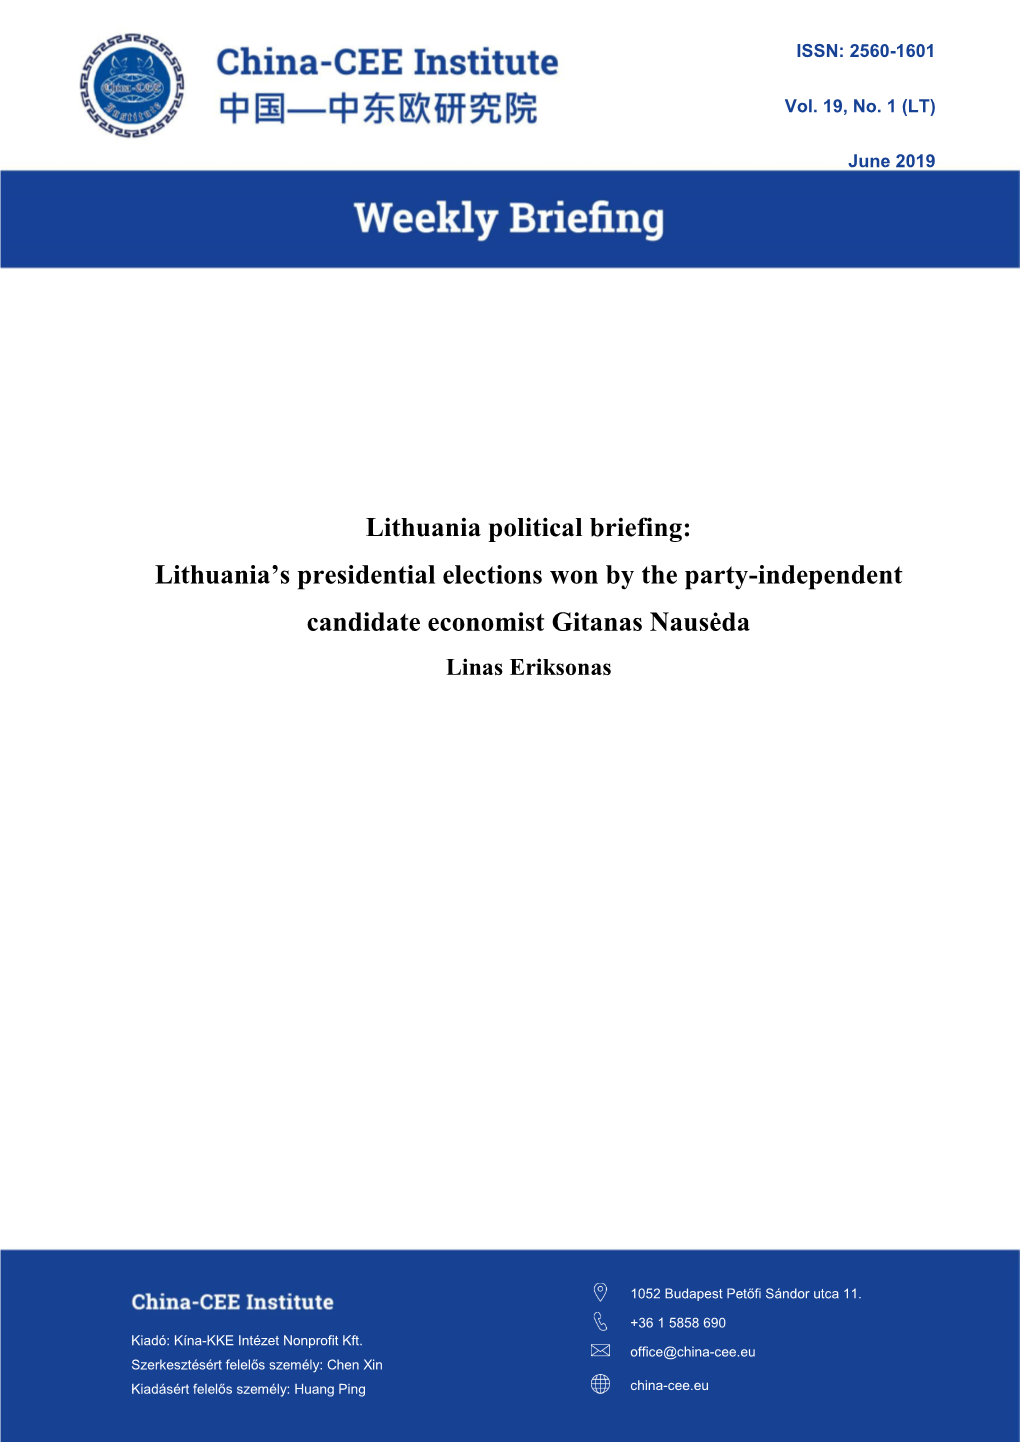 Lithuania's Presidential Elections Won by the Party-Independent